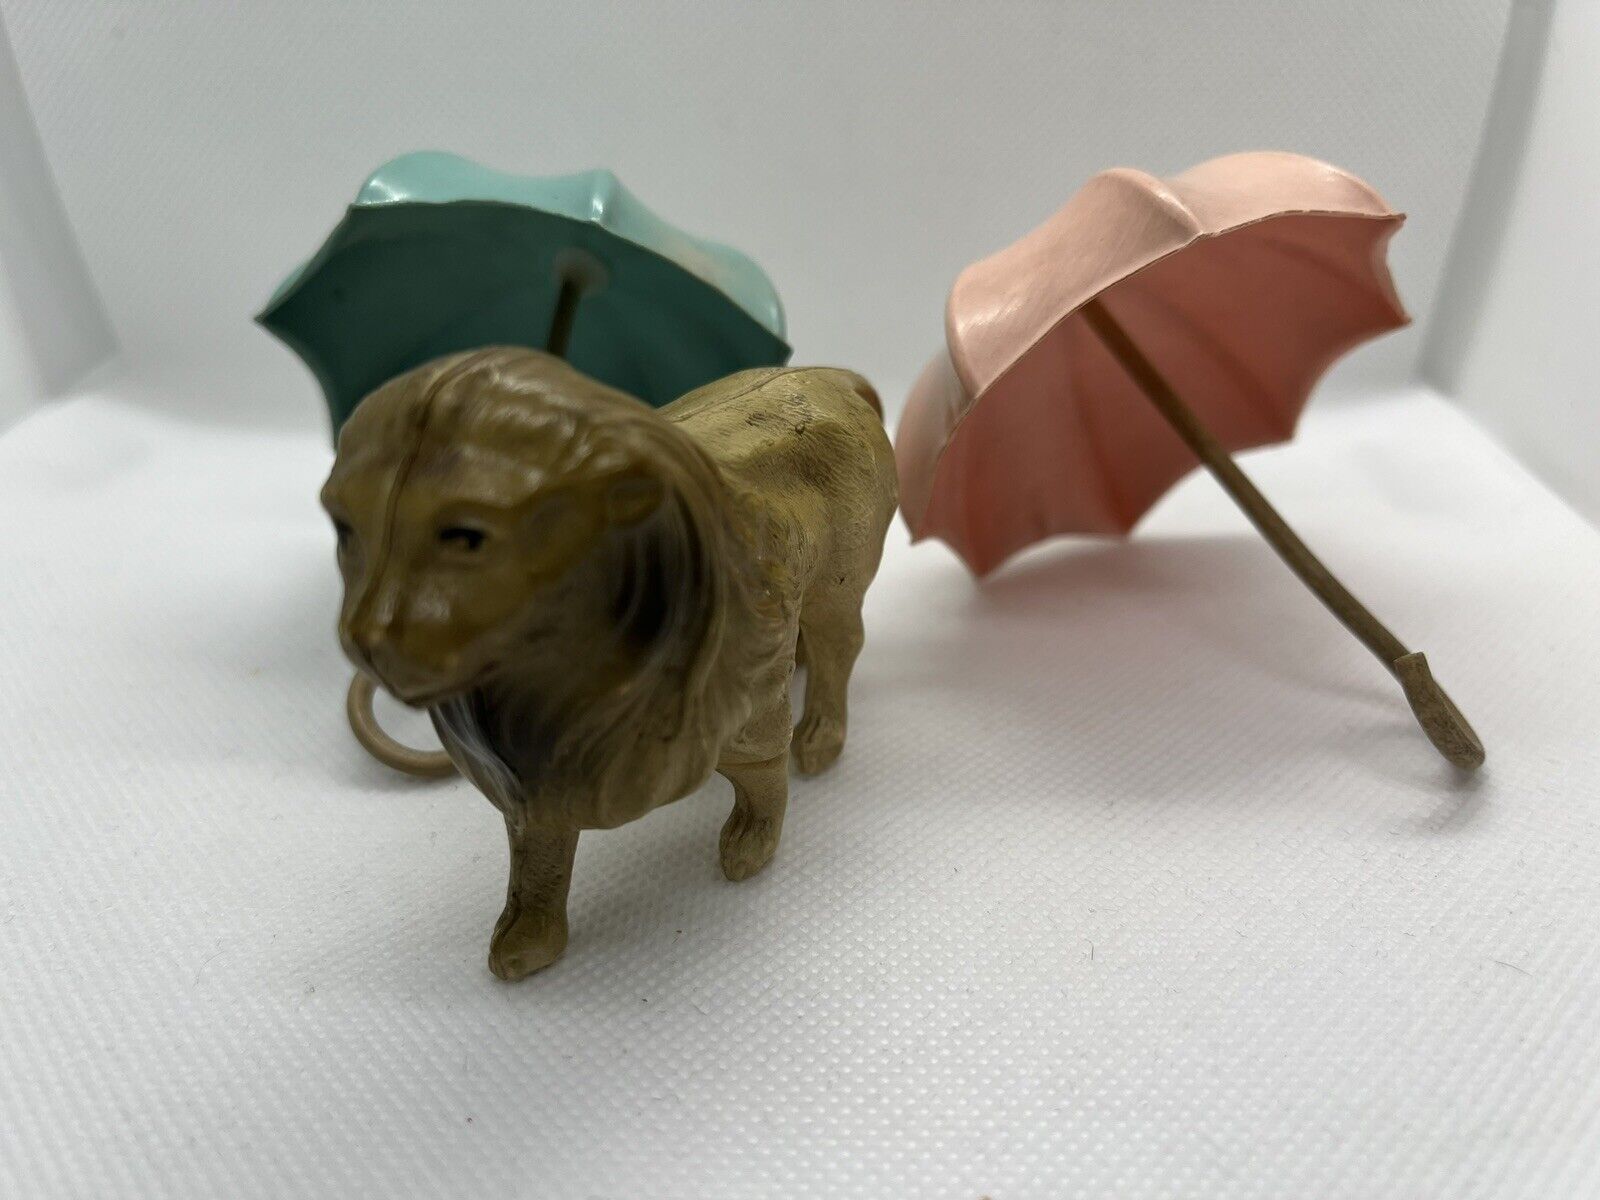 ❤️VINTAGE EARLY 1900'S LOT OF 3 CELLULOID items 2 UMBRELLAS AND 1 LION FIGURINE